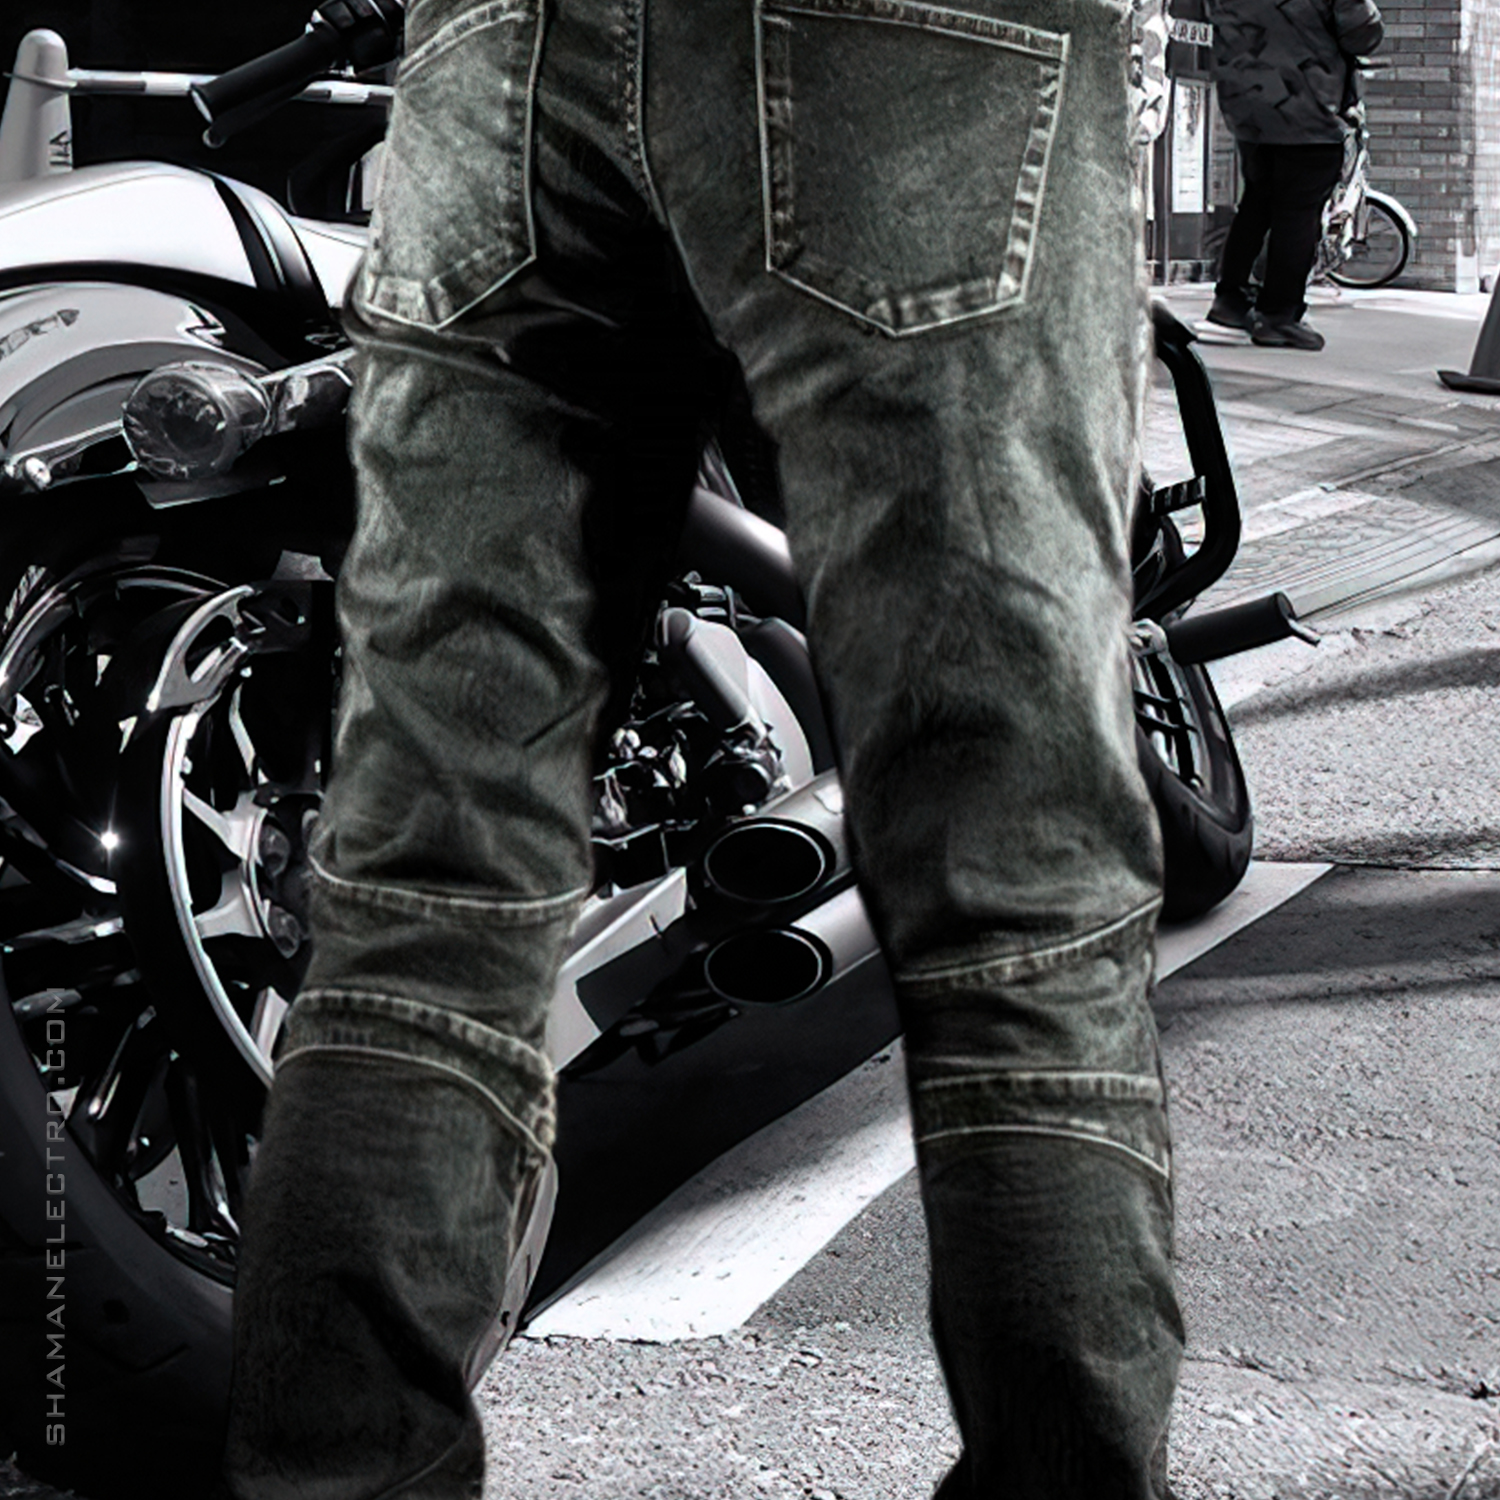 Mens Motor Riding Pants Motorcycle Jeans Distressed Denim Protection Gear  Pads | eBay